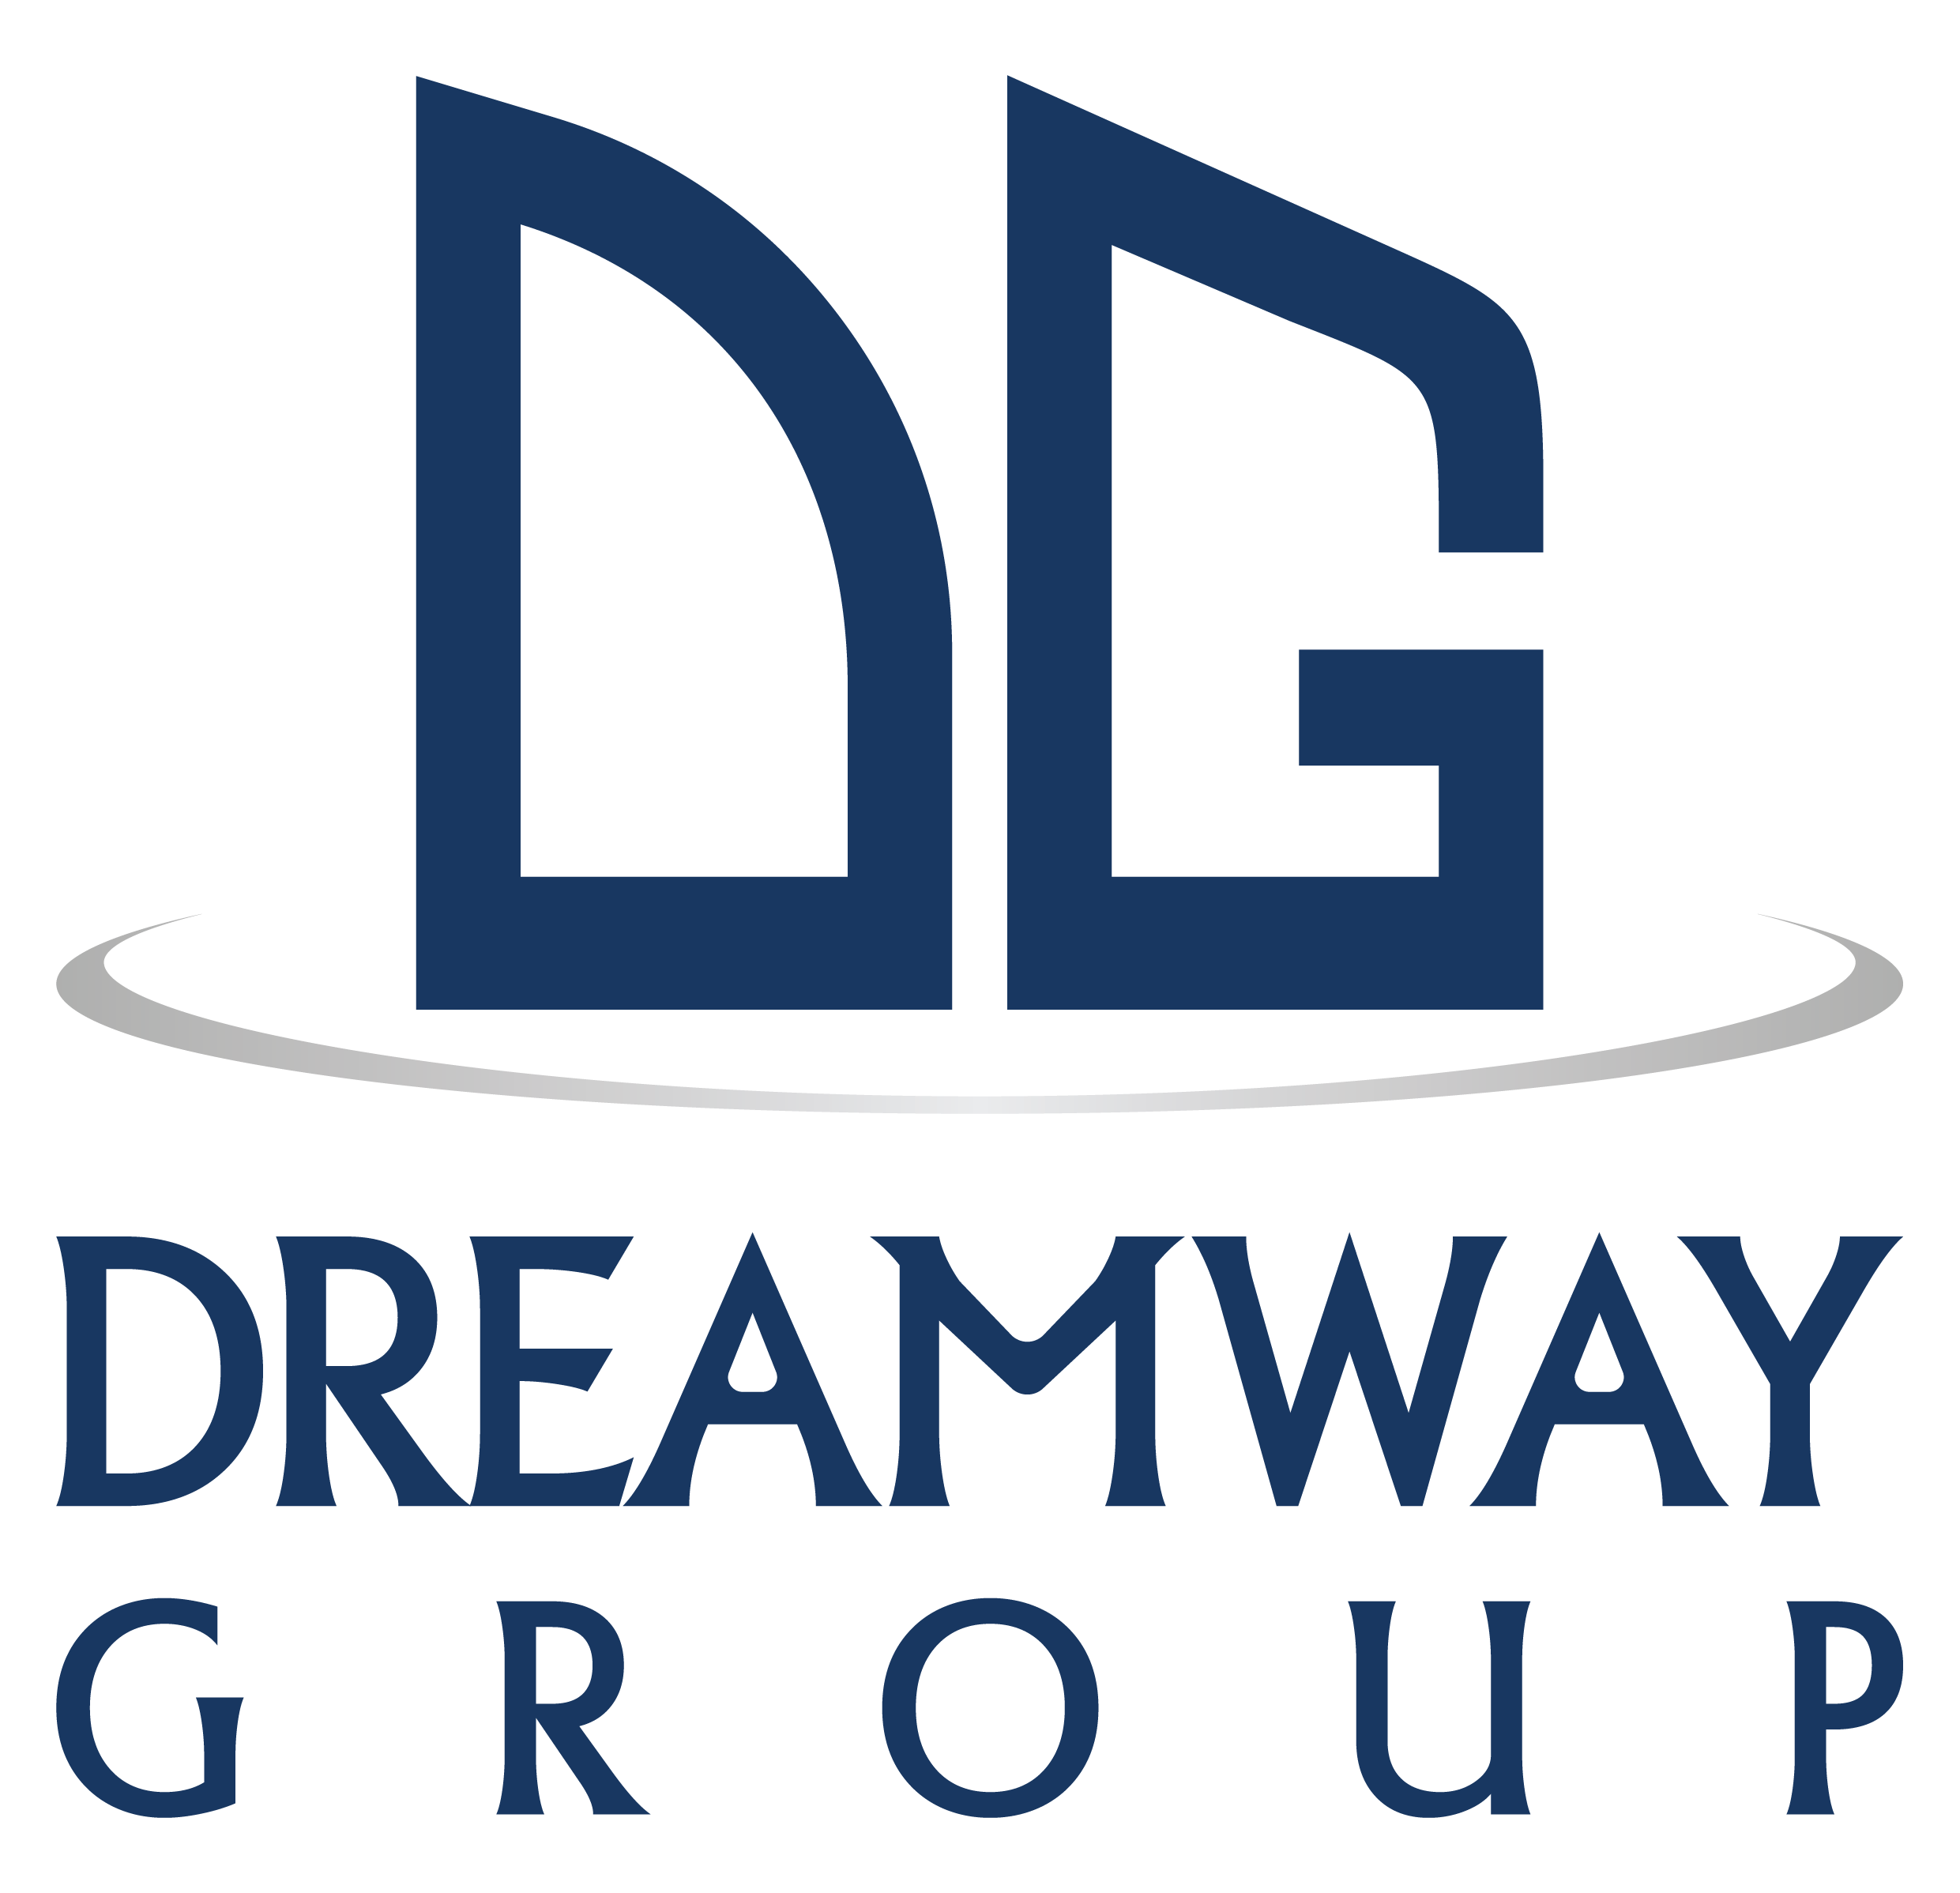 Welcome to Dreamway Group